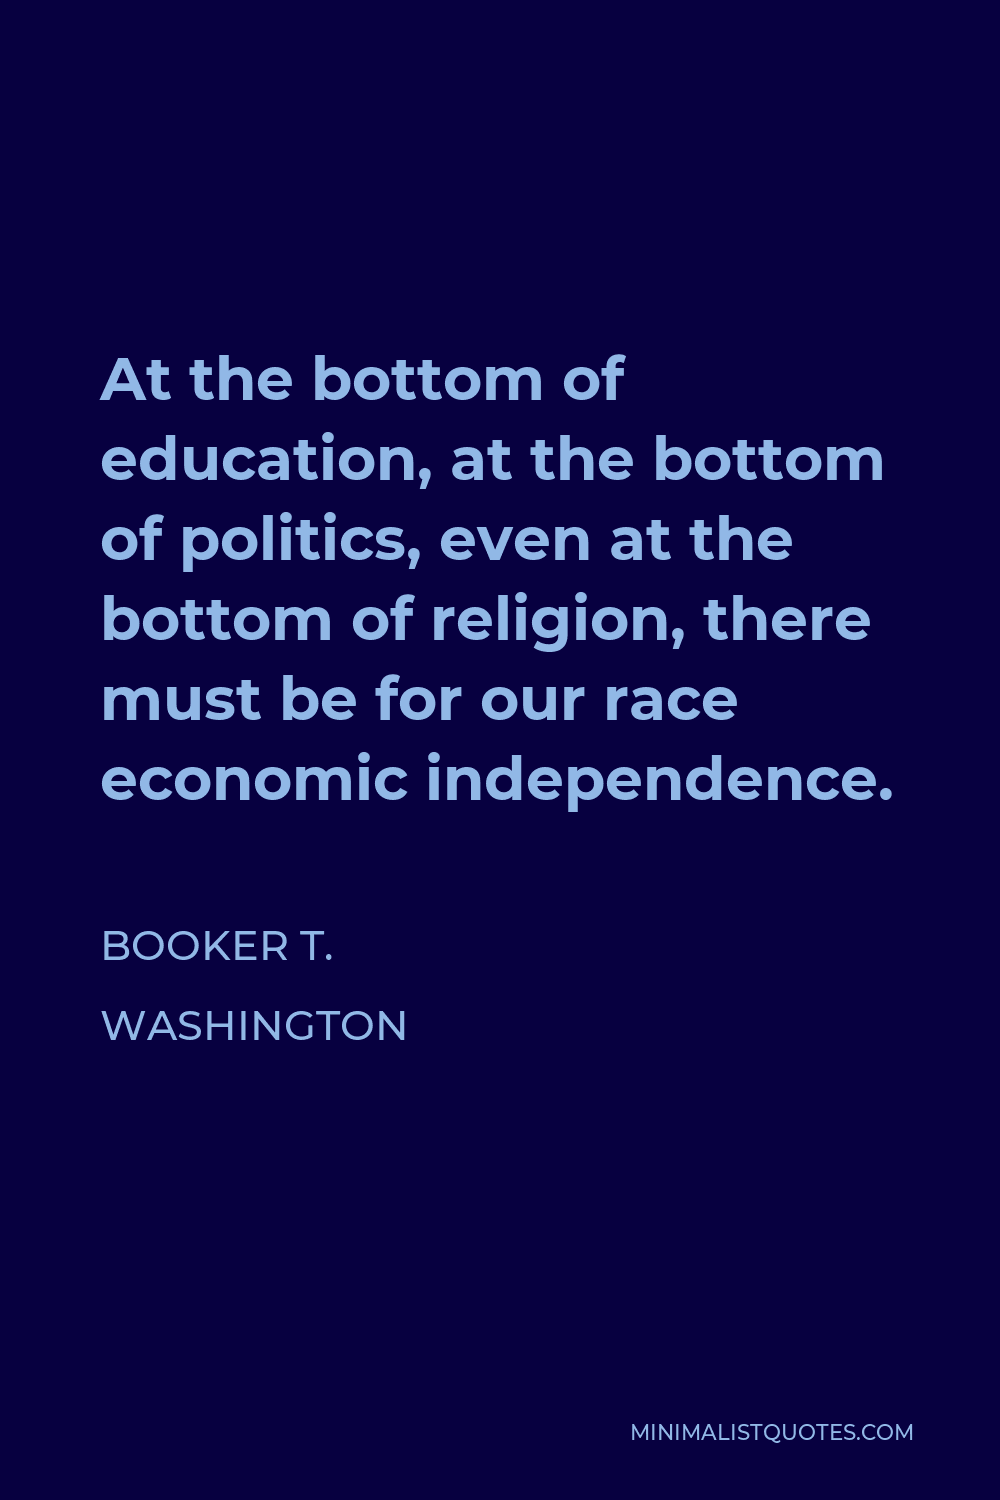 Booker T. Washington Quote - At the bottom of education, at the bottom of politics, even at the bottom of religion, there must be for our race economic independence.